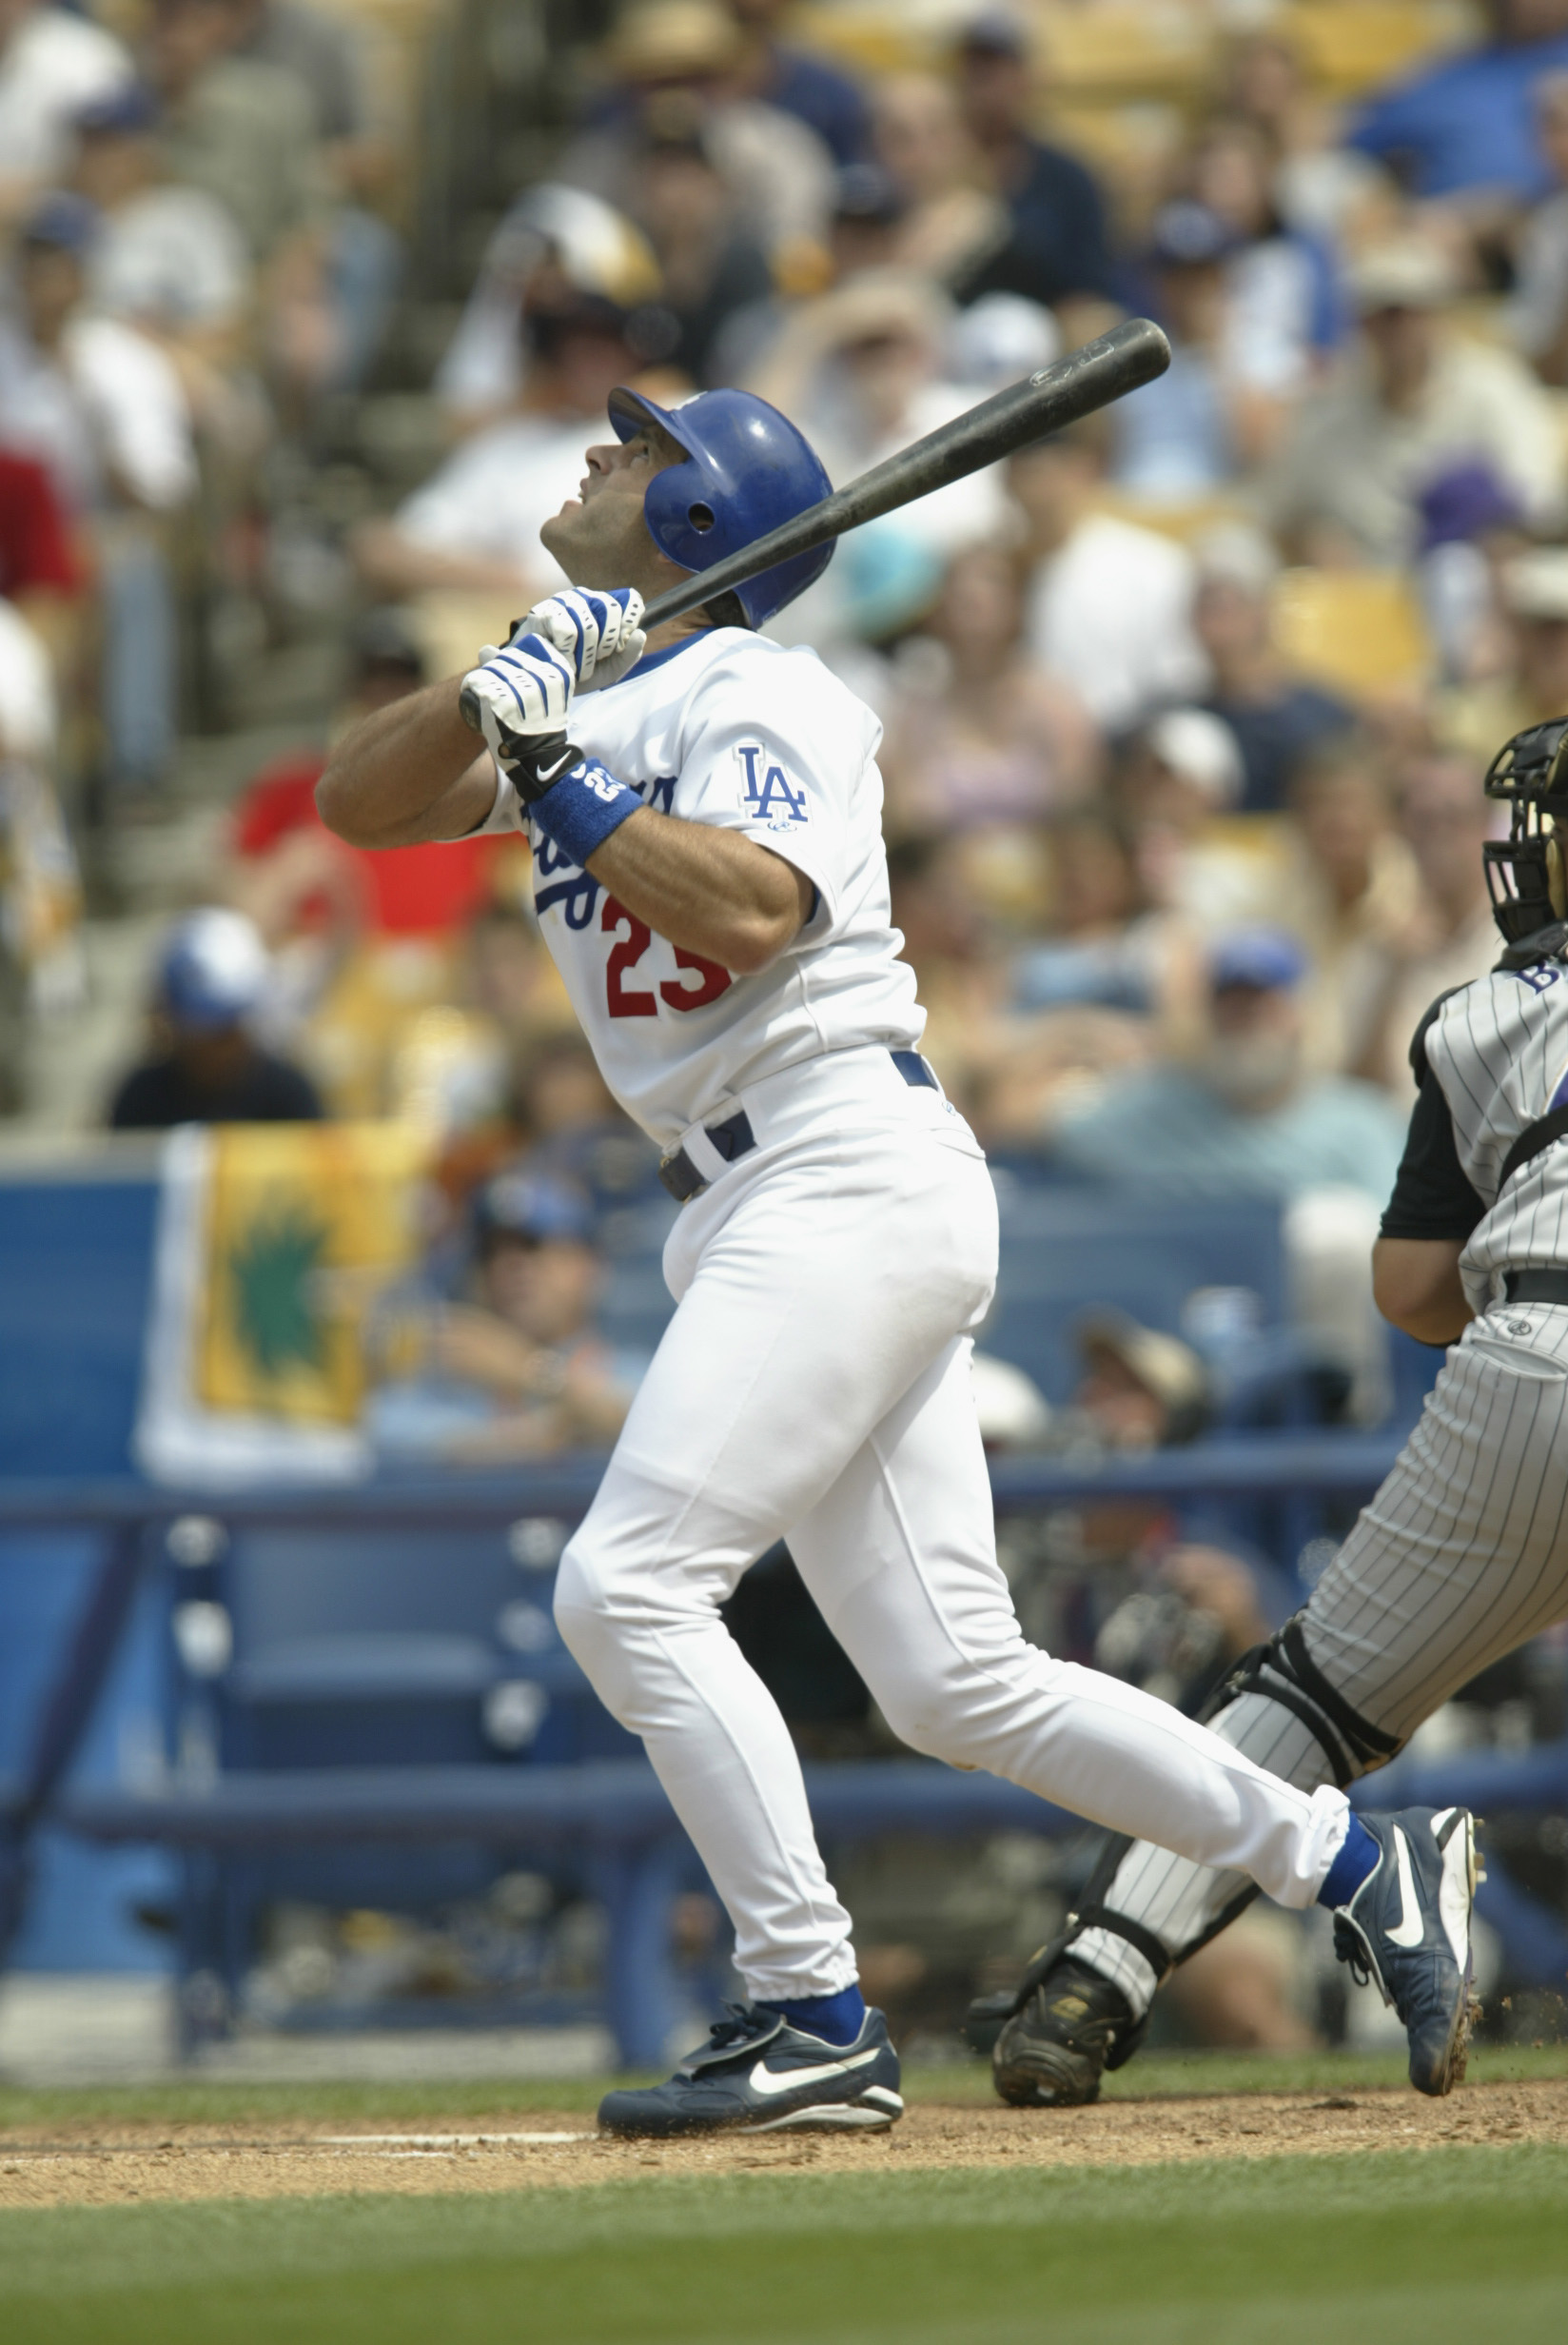 LOS ANGELES - JUNE 2:  Eric Karros #23 of the Los Angeles Dodgers bats during their game versus the Arizona Diamondbacks at Dodger Stadium in Los Angeles, California on June 2, 2002.  The Dodgers won 6-3. (Photo by Stephen Dunn/Getty Images)